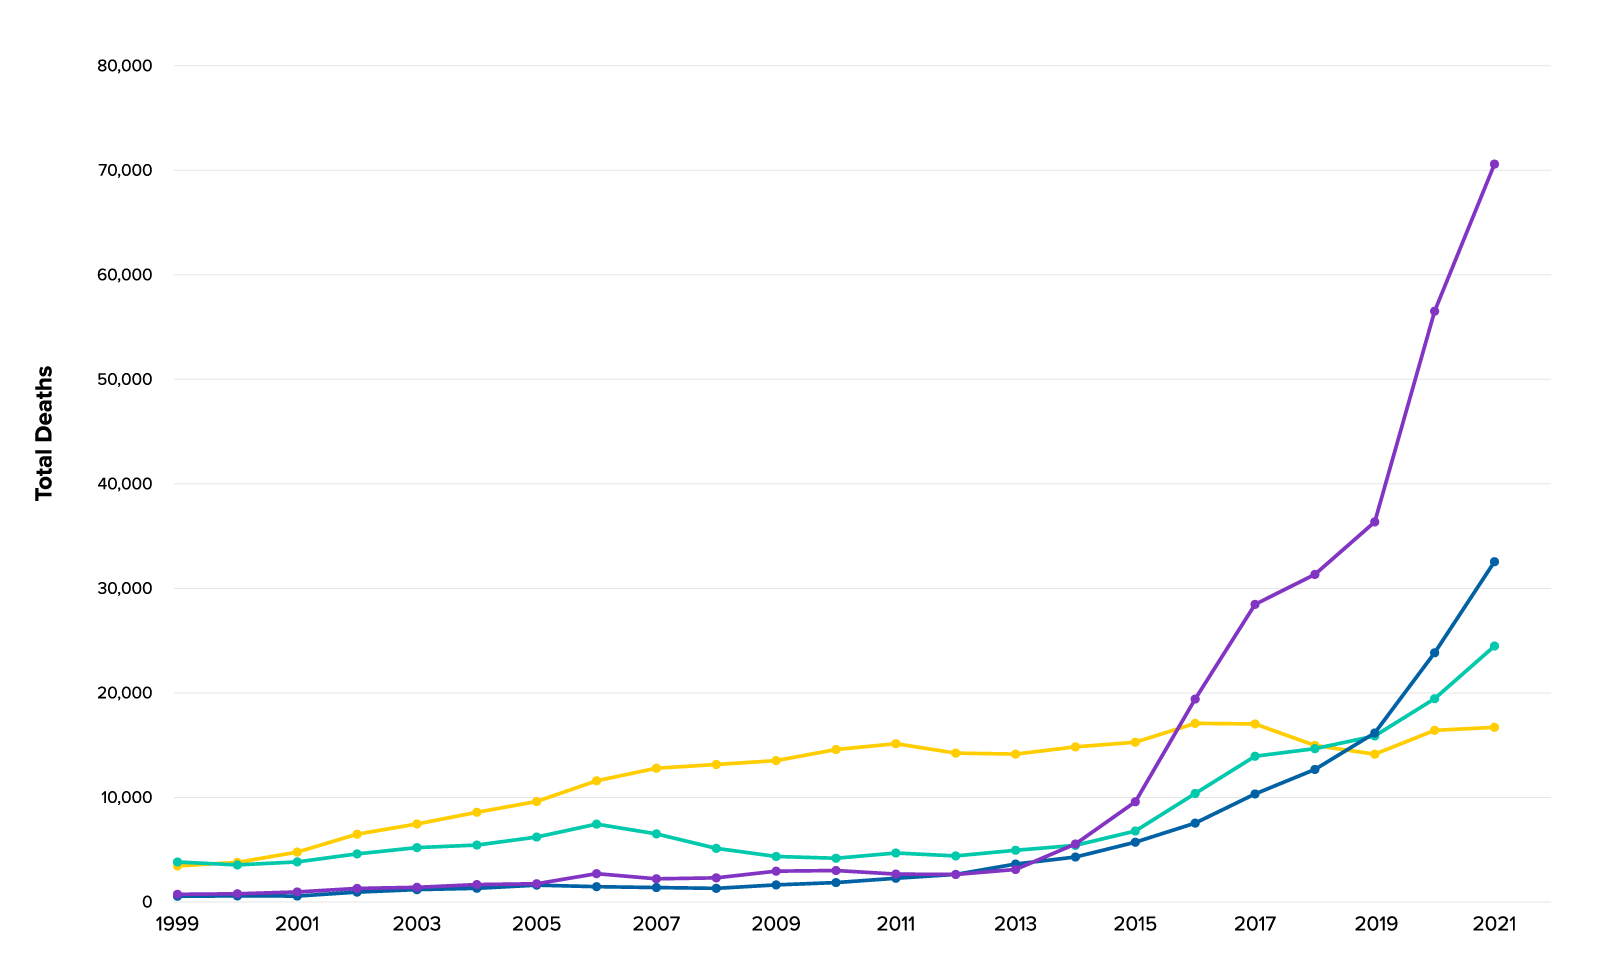 Line graph chart showing the upward trends in U.S. drug overdose deaths from 1999 - 2021.